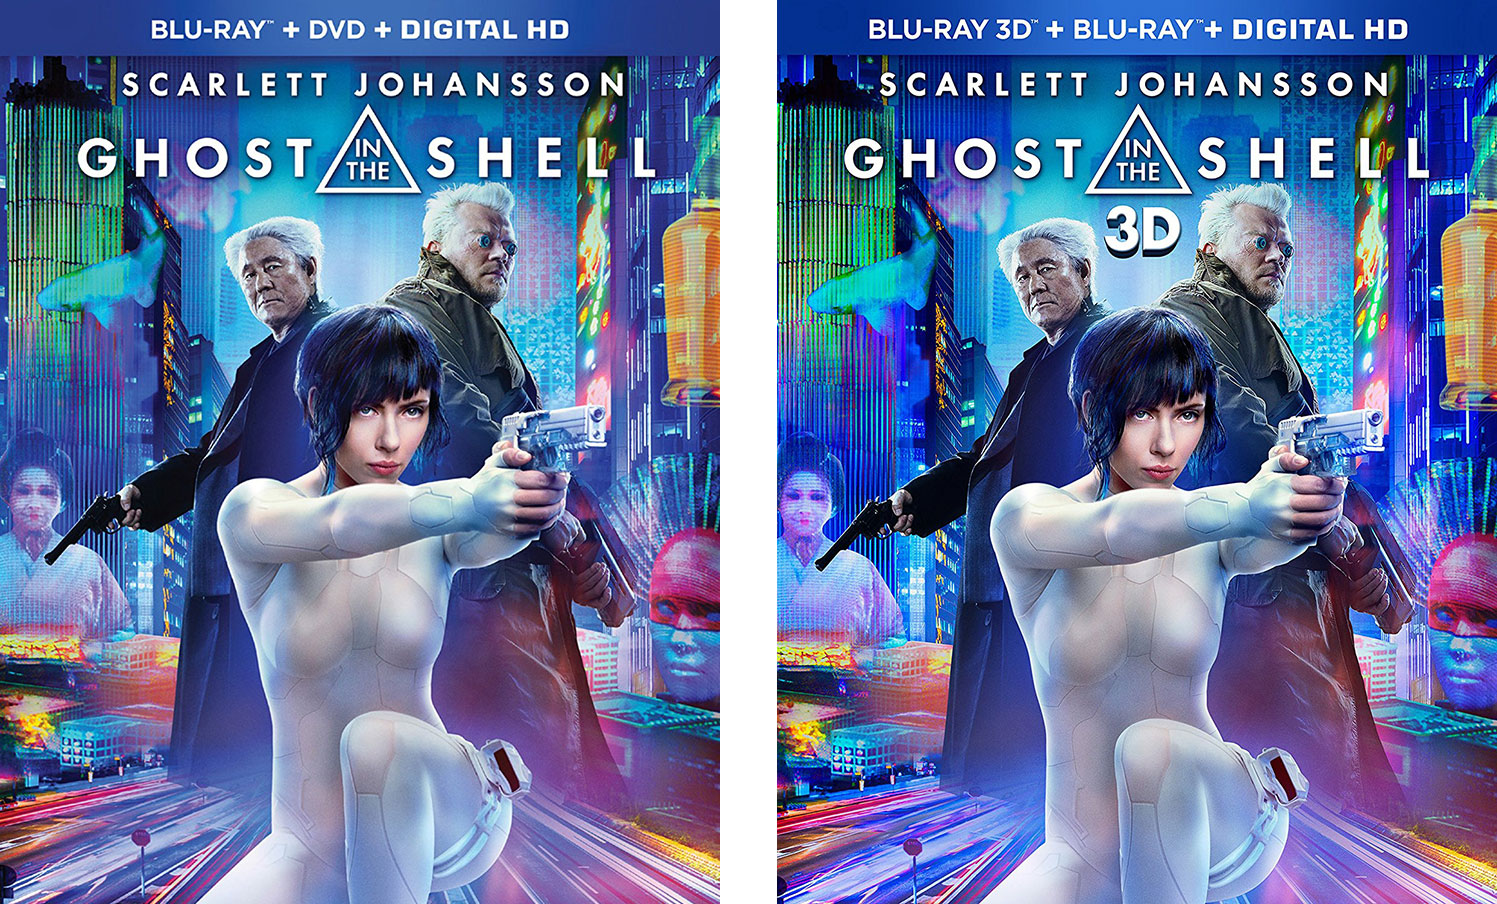 ghost-in-the-shell-blu-ray-4k-2up